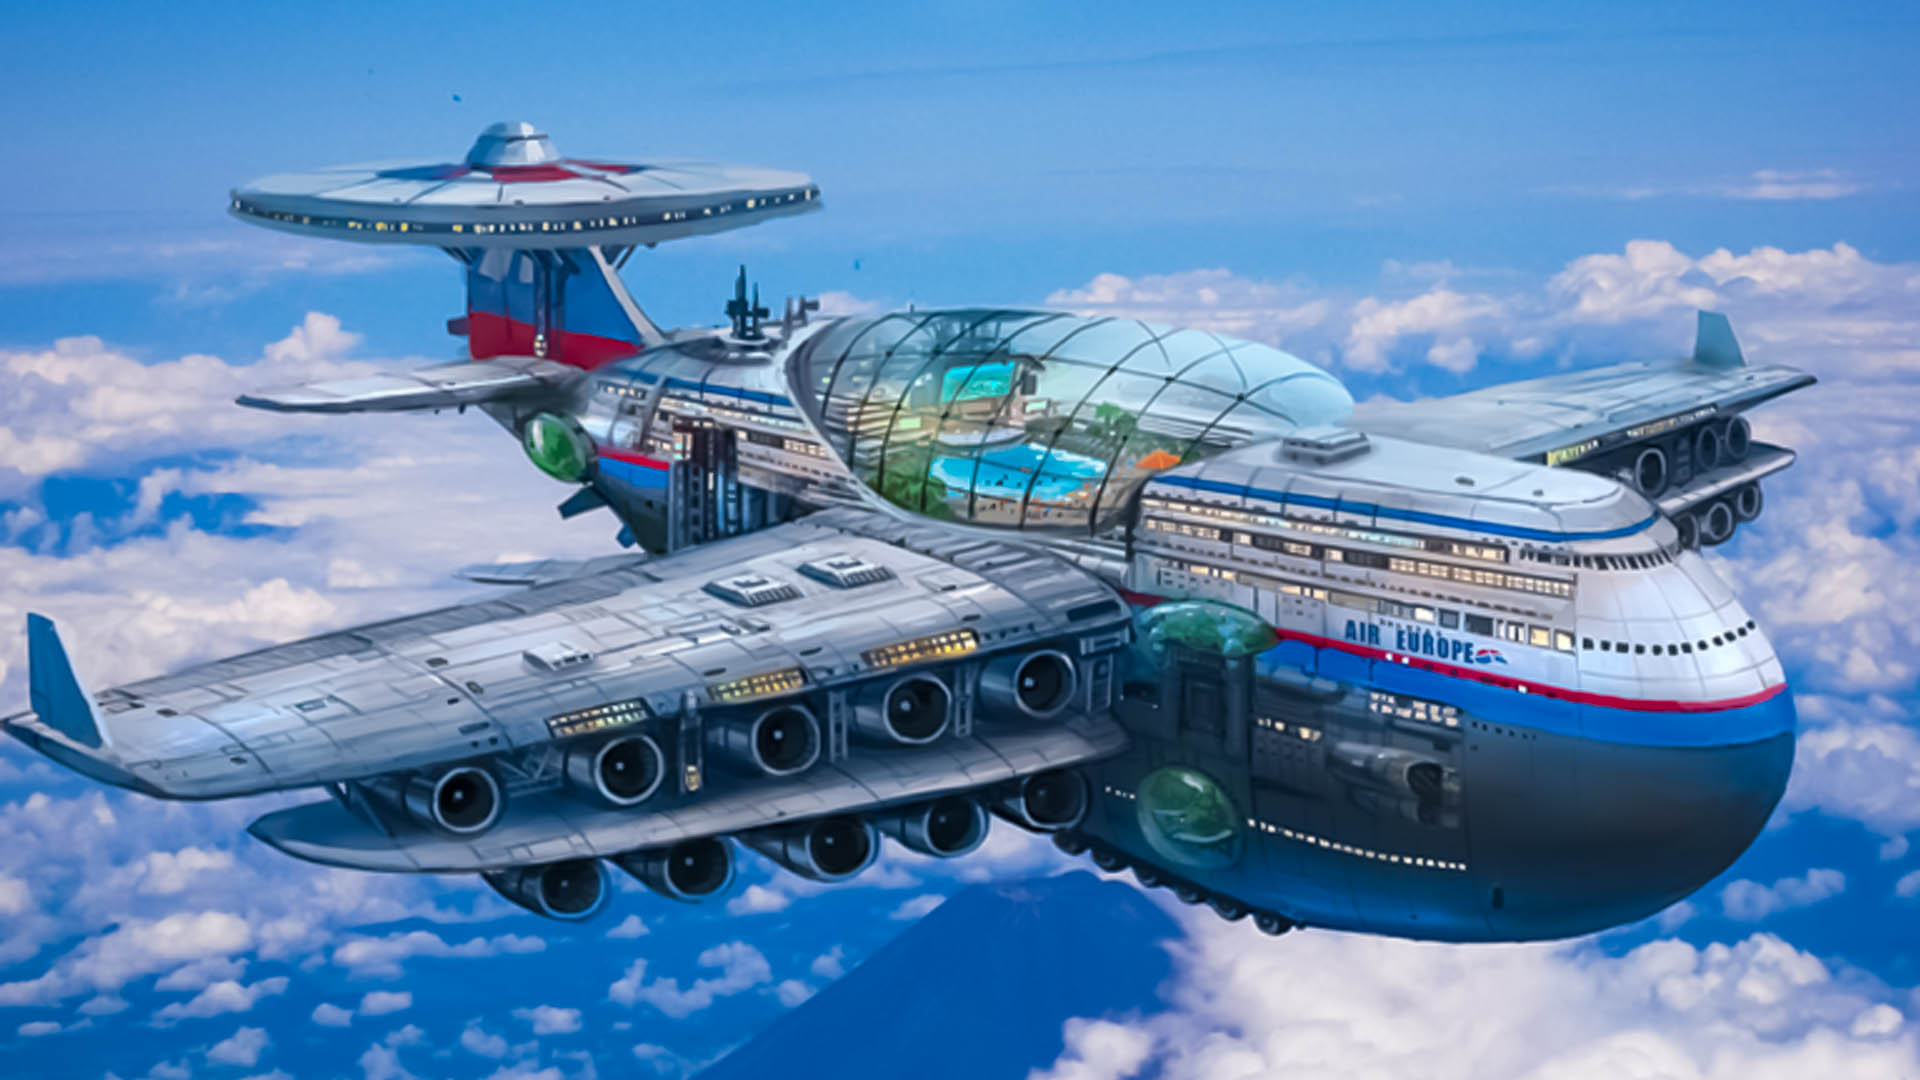 An airborne hotel that never lands could carry 5,000 guests